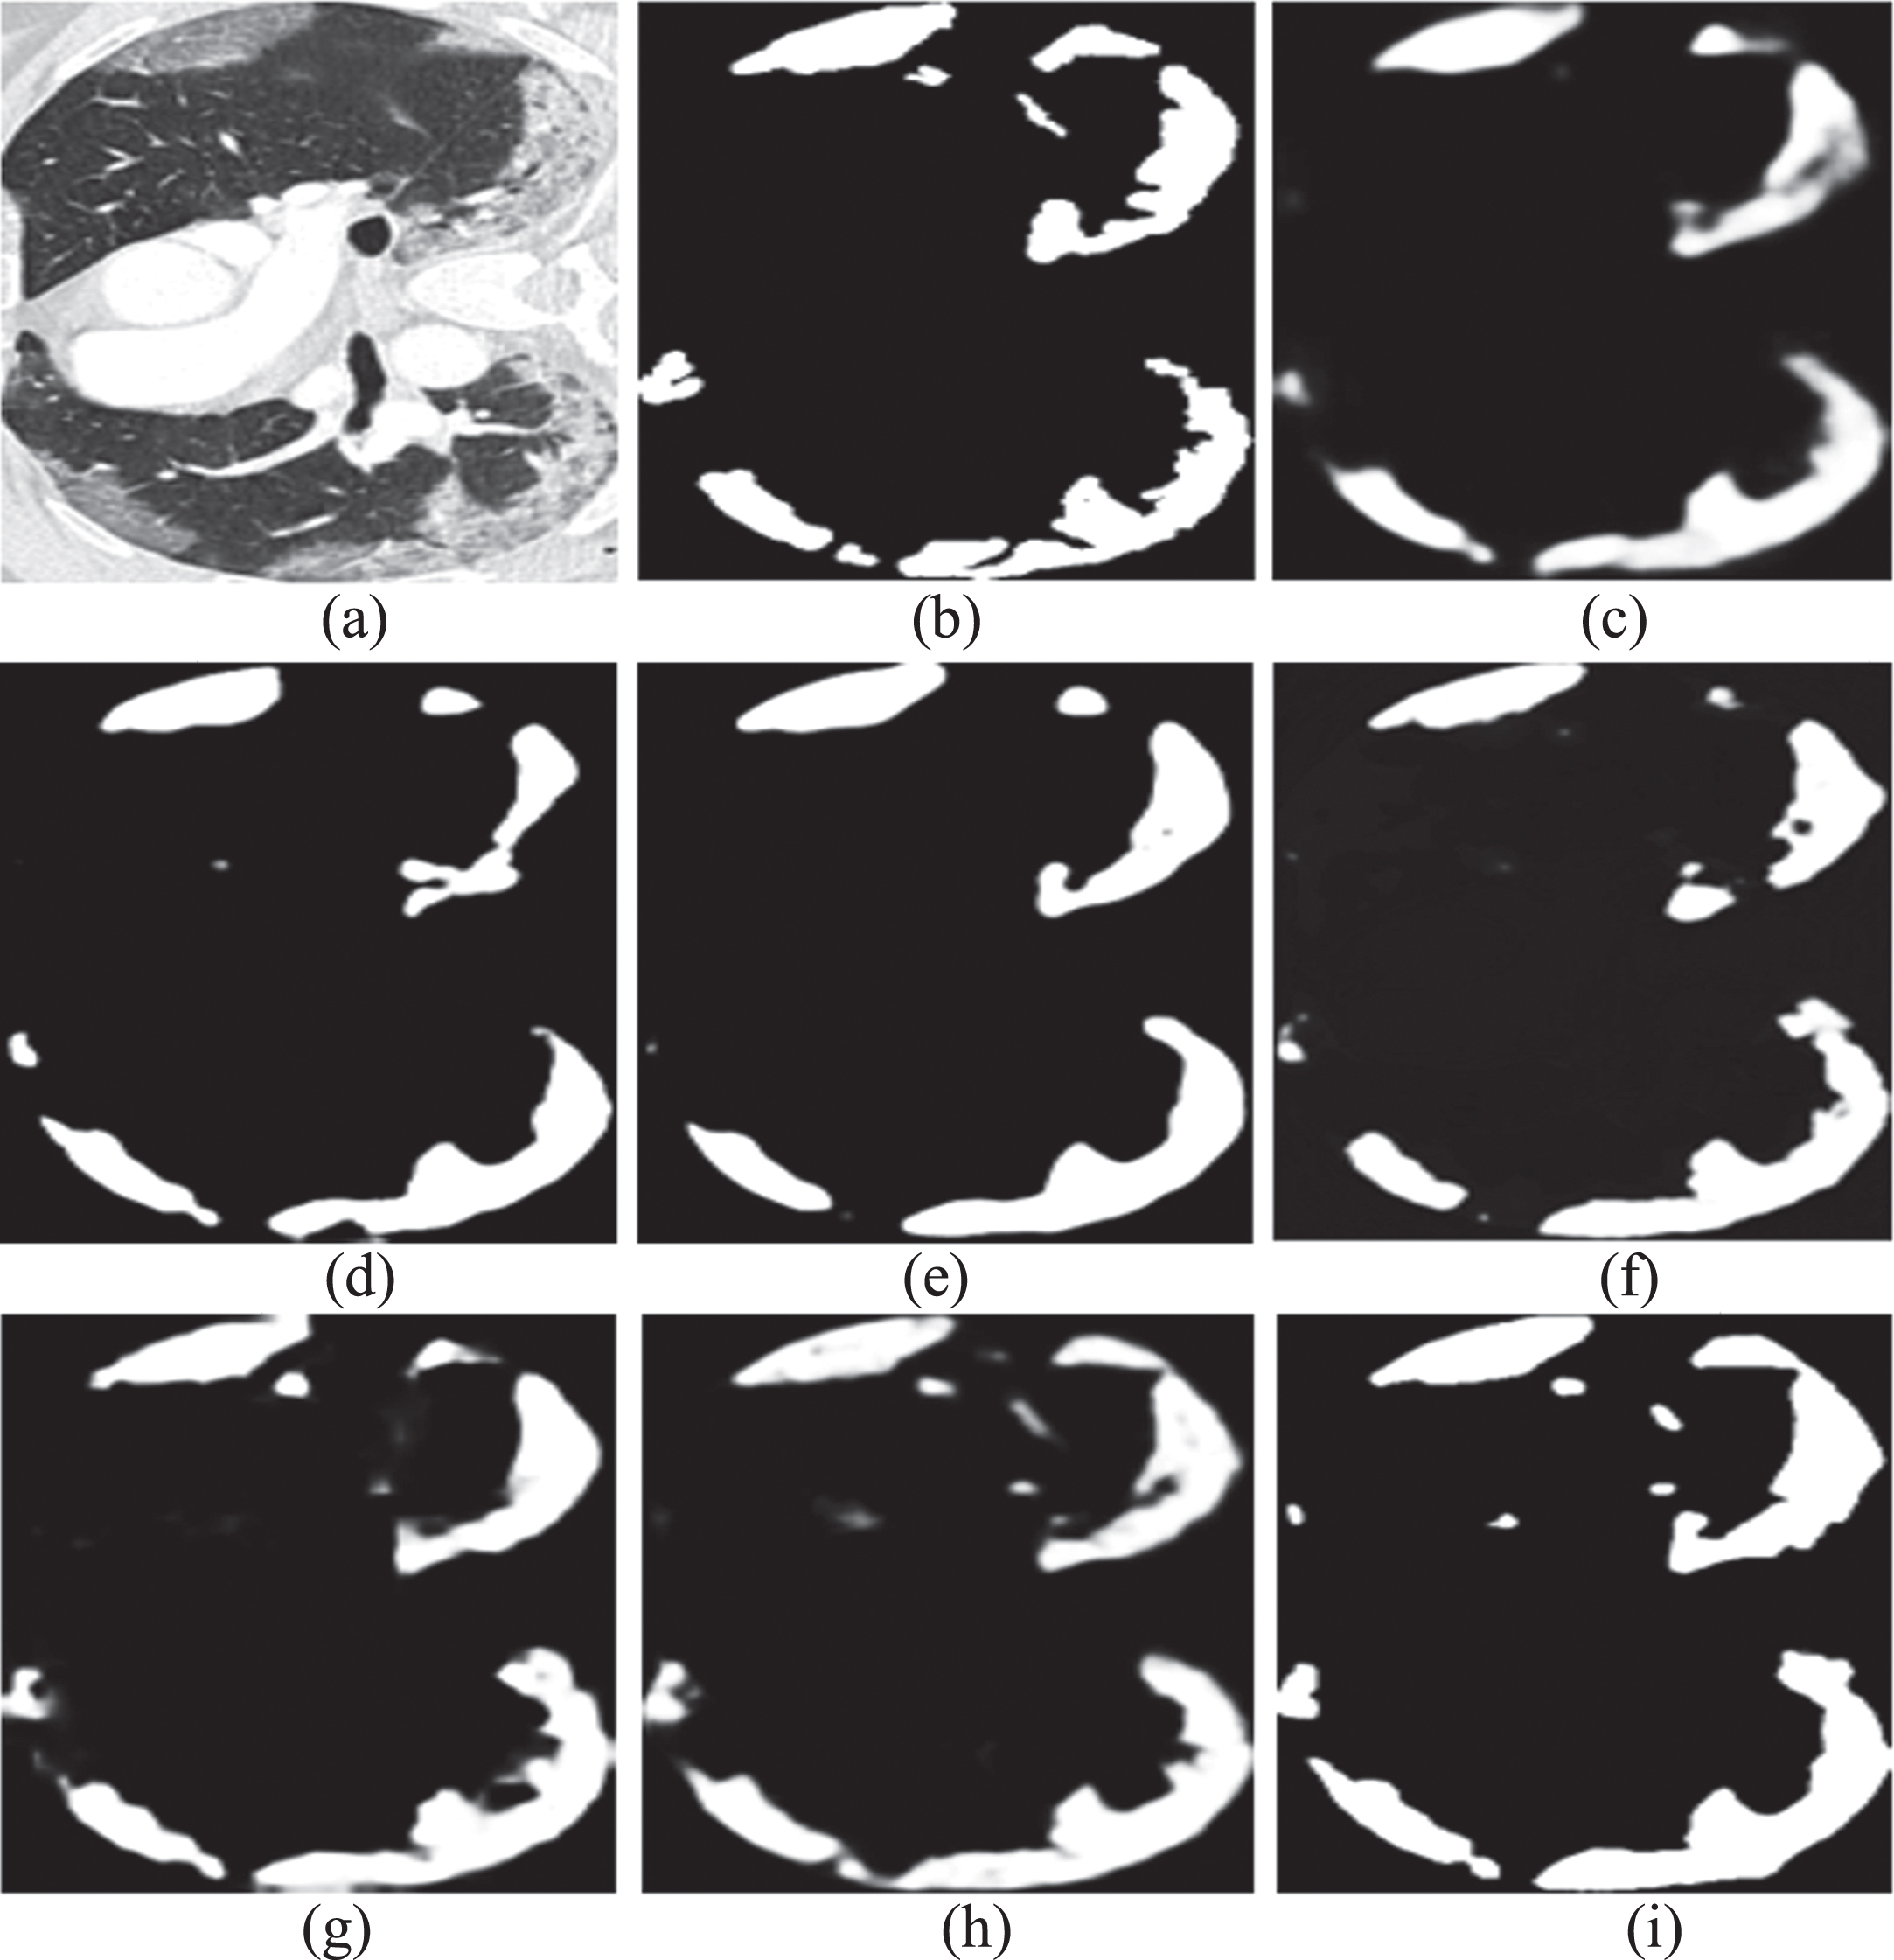 Segmenting results of a COVID-19 CT scan from testing set using different methods. (a) Raw CT scan; (b) Ground truth; (c) UNet, (d) UNet++, (e) Att-UNet, (f) Dense-UNet, (g) Inf-Net, (h) COPLE-Net, and (i) DAF-UNet.